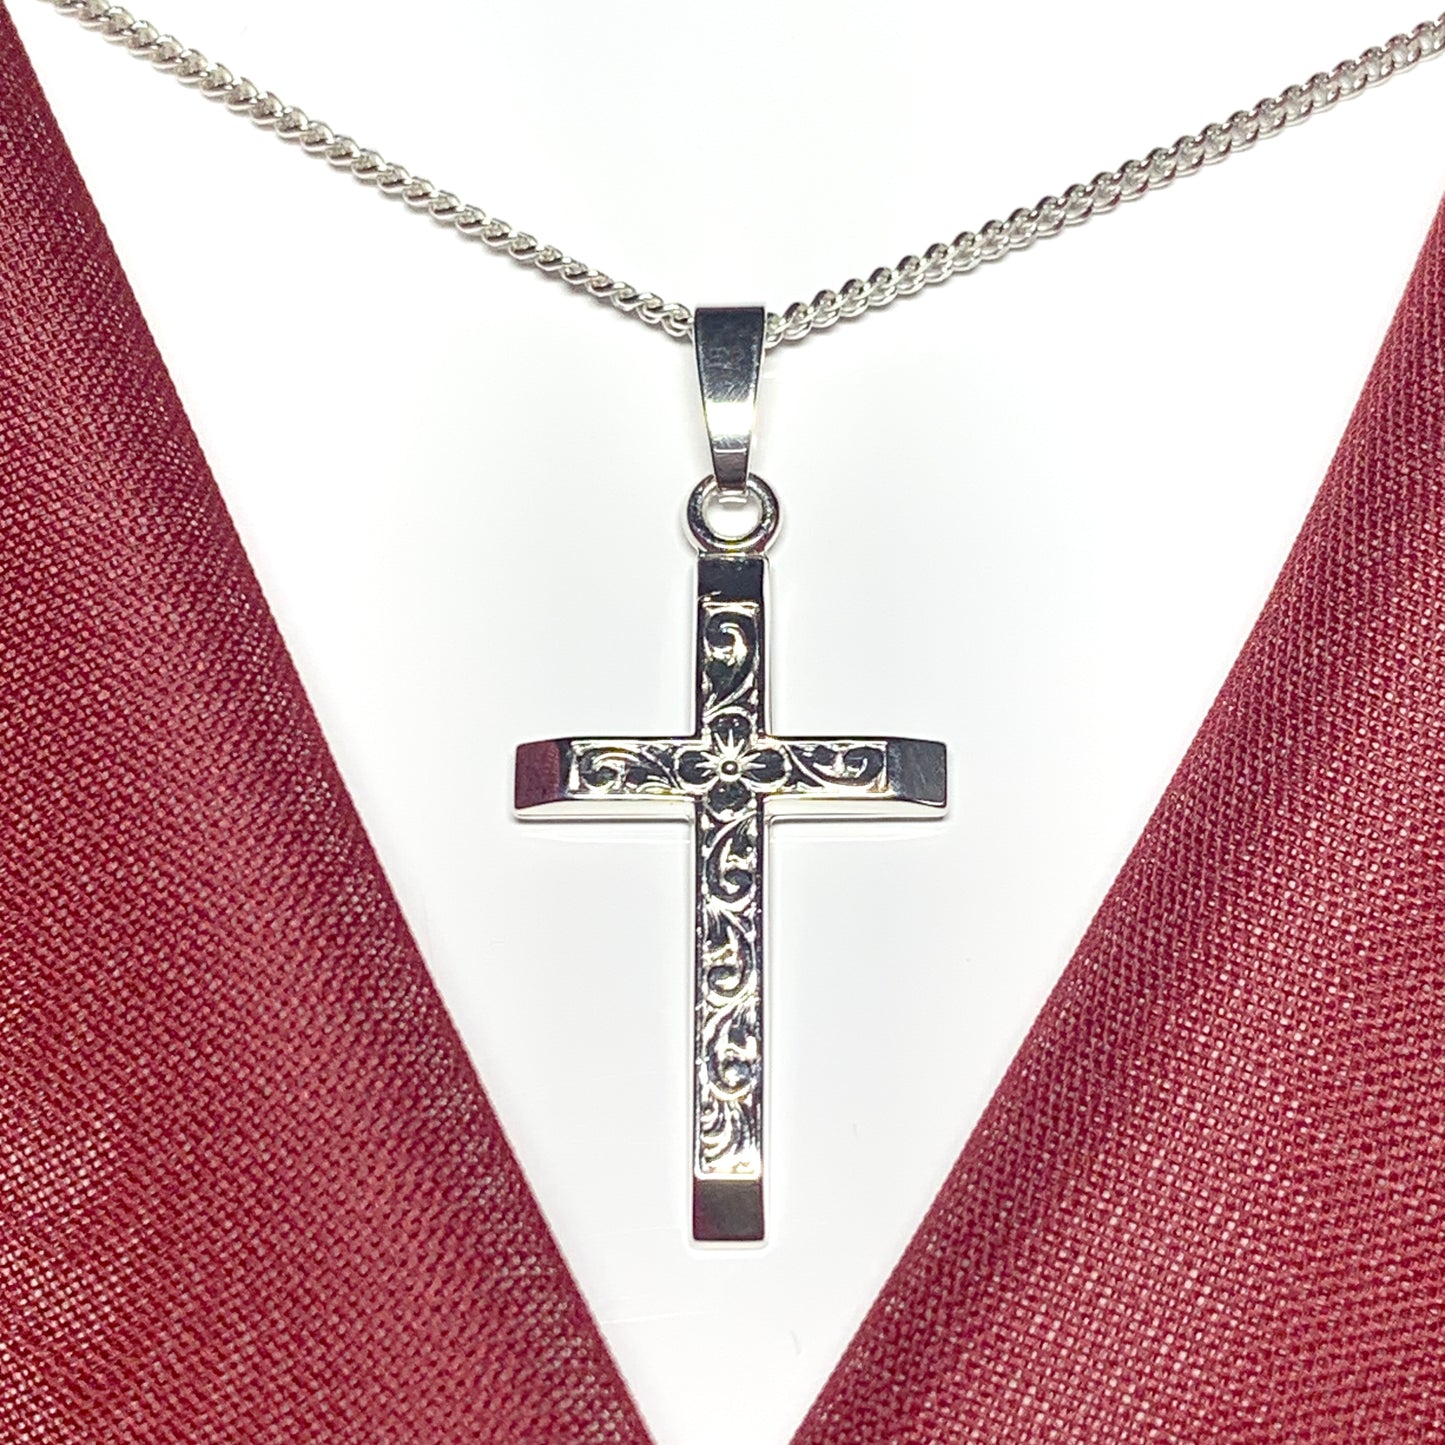 Solid diamond cut cross patterned sterling silver including chain